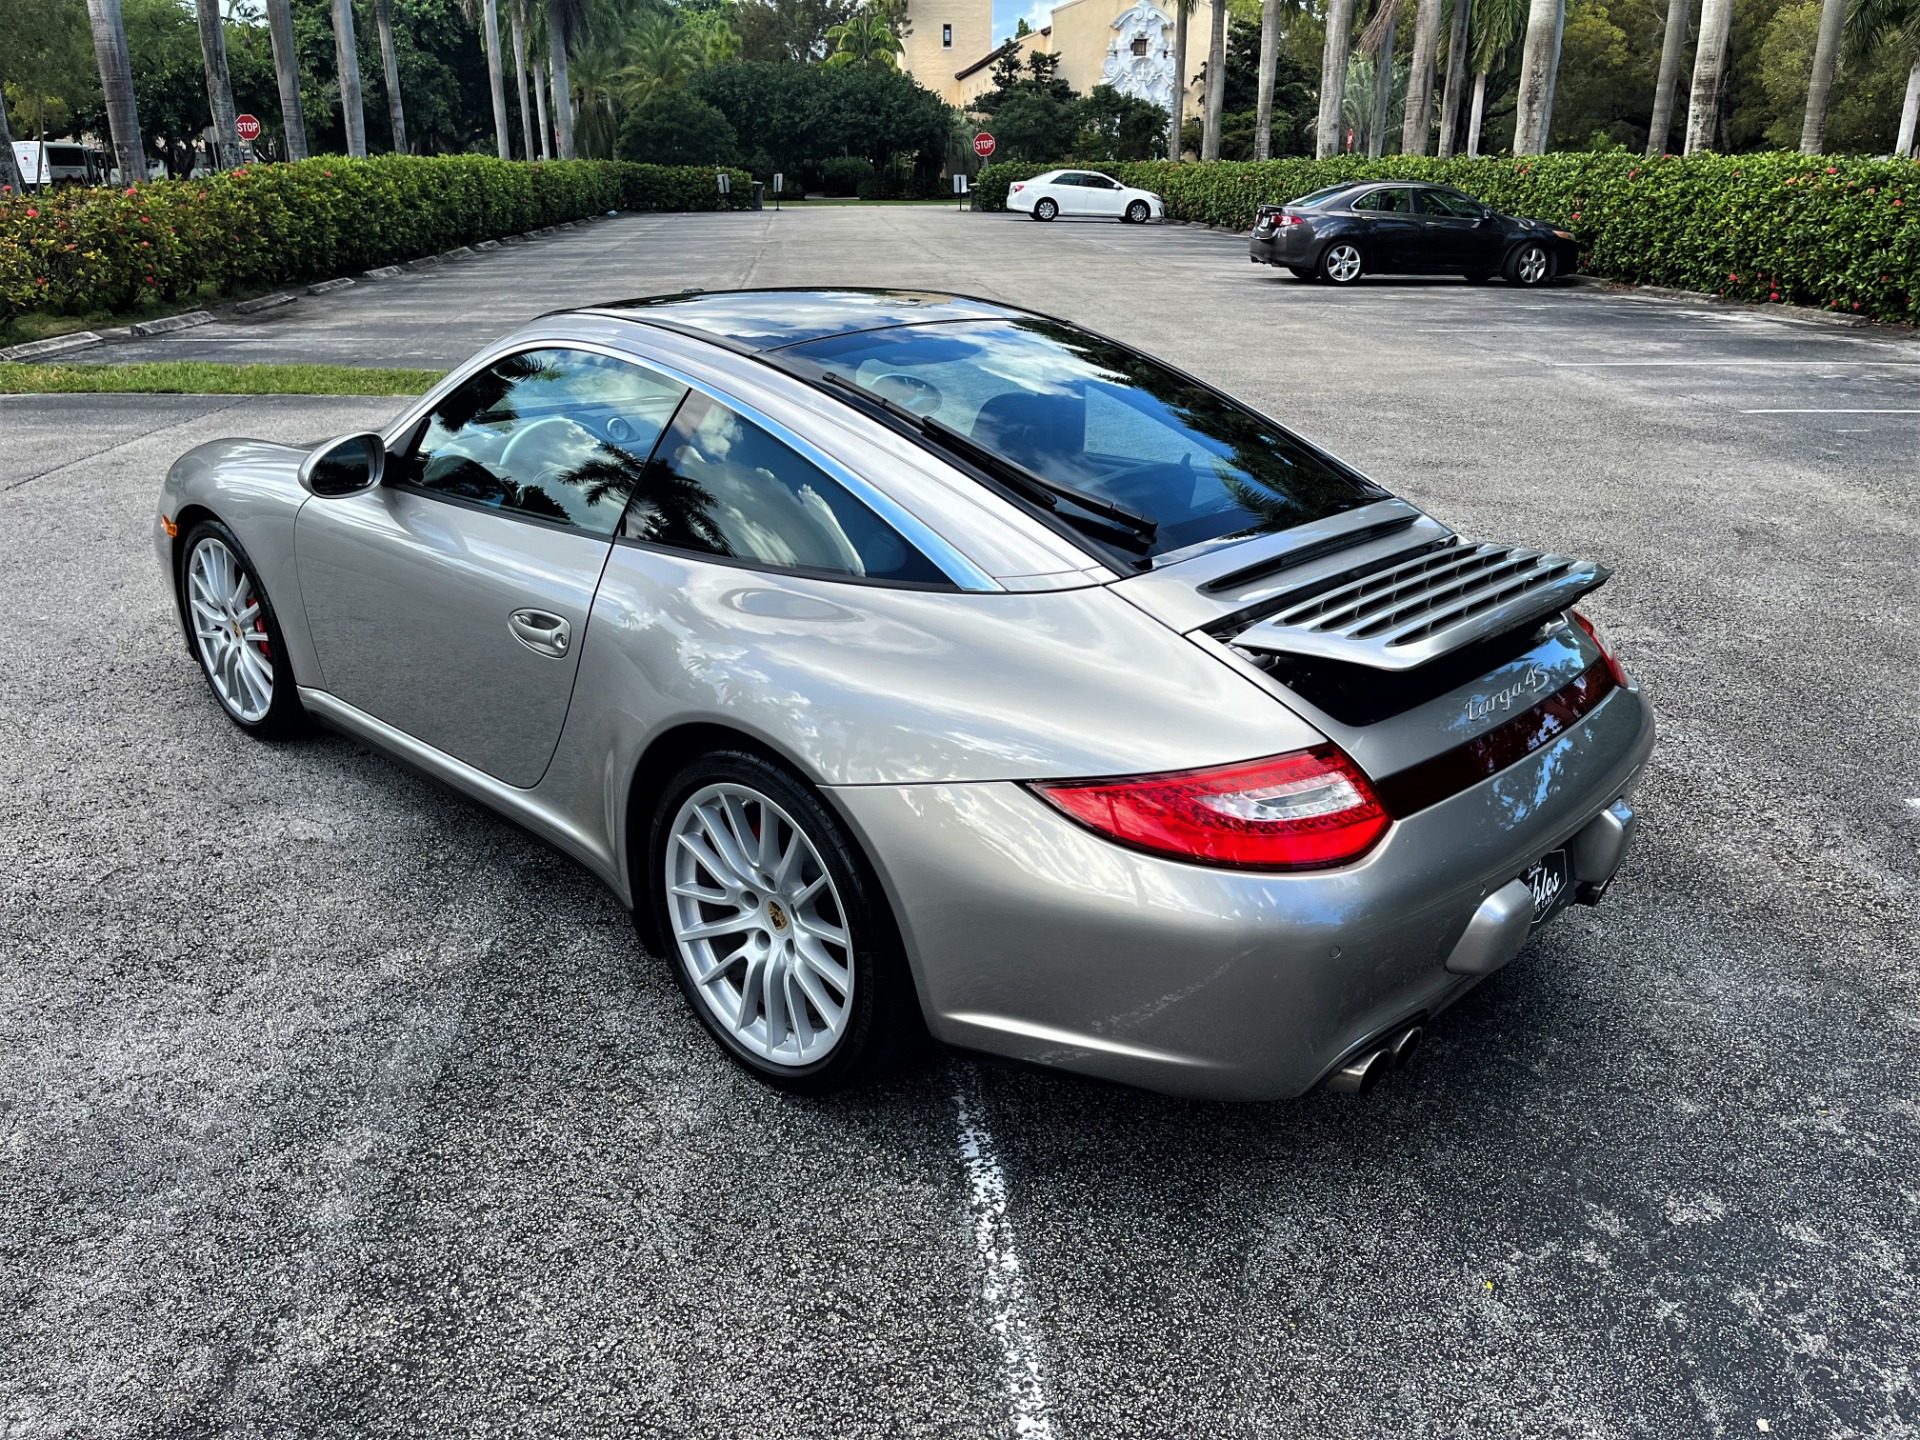 Used 2011 Porsche 911 Targa 4S for sale $88,850 at The Gables Sports Cars in Miami FL 33146 1